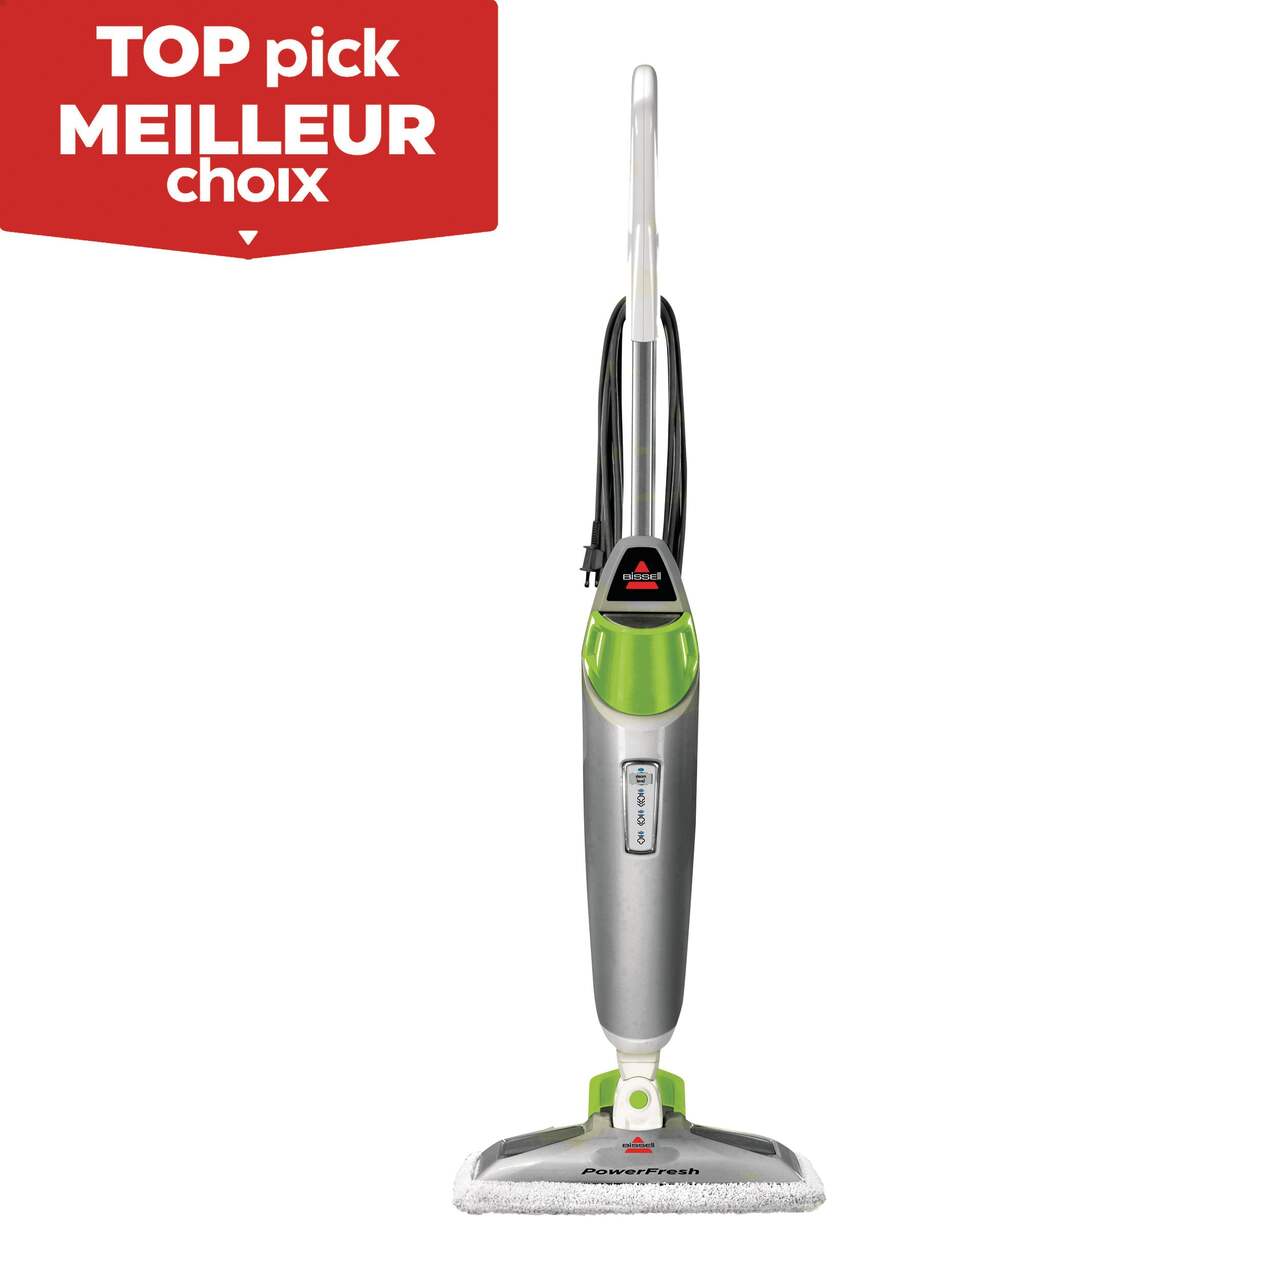 https://media-www.canadiantire.ca/product/living/cleaning/vacuums-and-floorcare/0437813/bissell-powerfresh-steam-mop-8493e082-1d4d-4e1c-951b-0f2864808910-jpgrendition.jpg?imdensity=1&imwidth=640&impolicy=mZoom